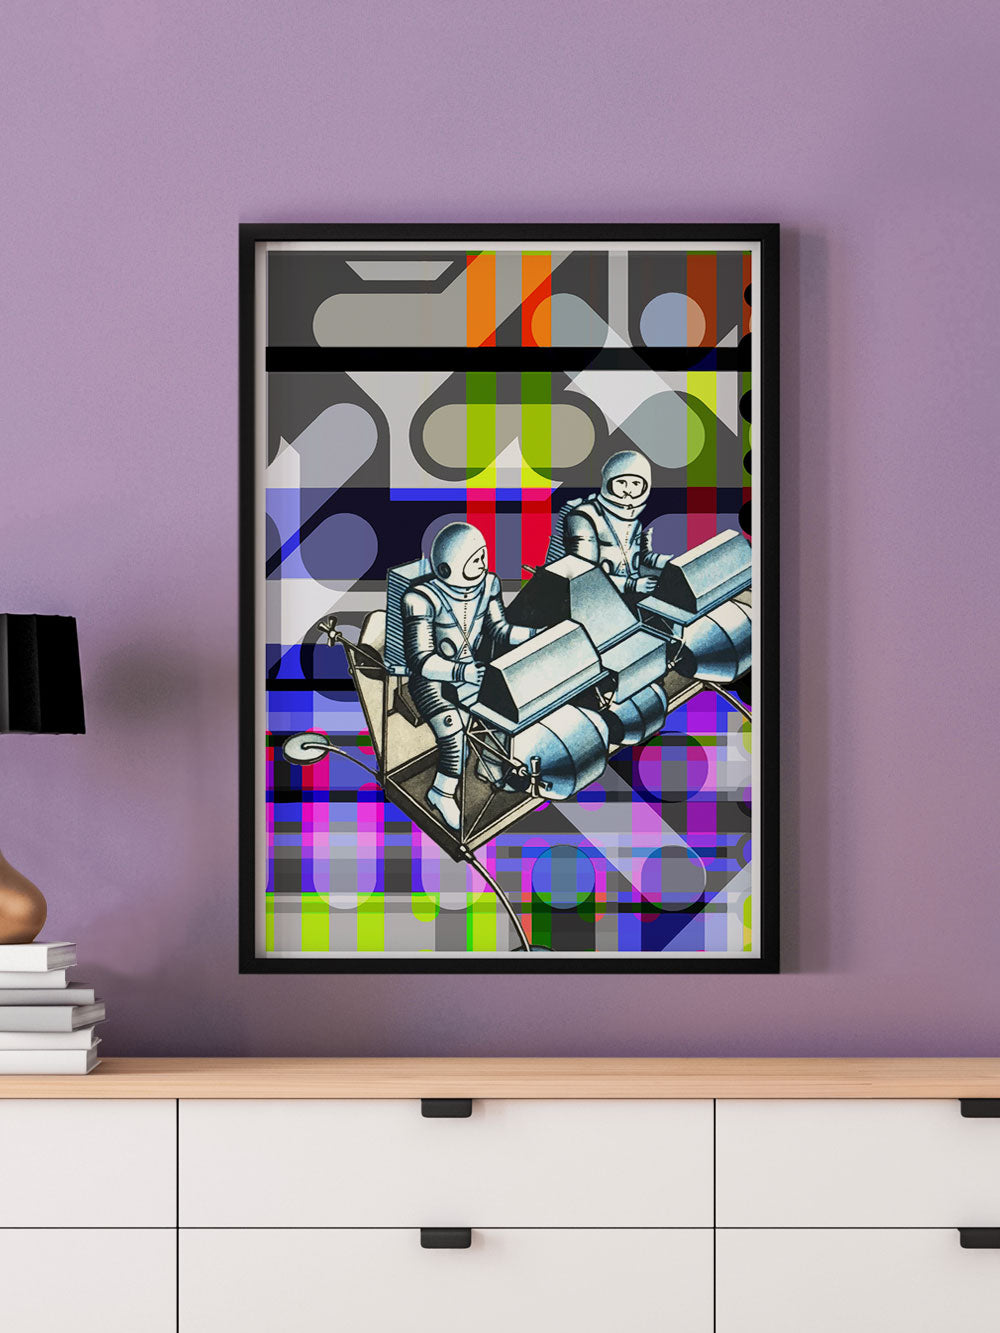 Crash Landing Collage Wall Art in a frame on a wall